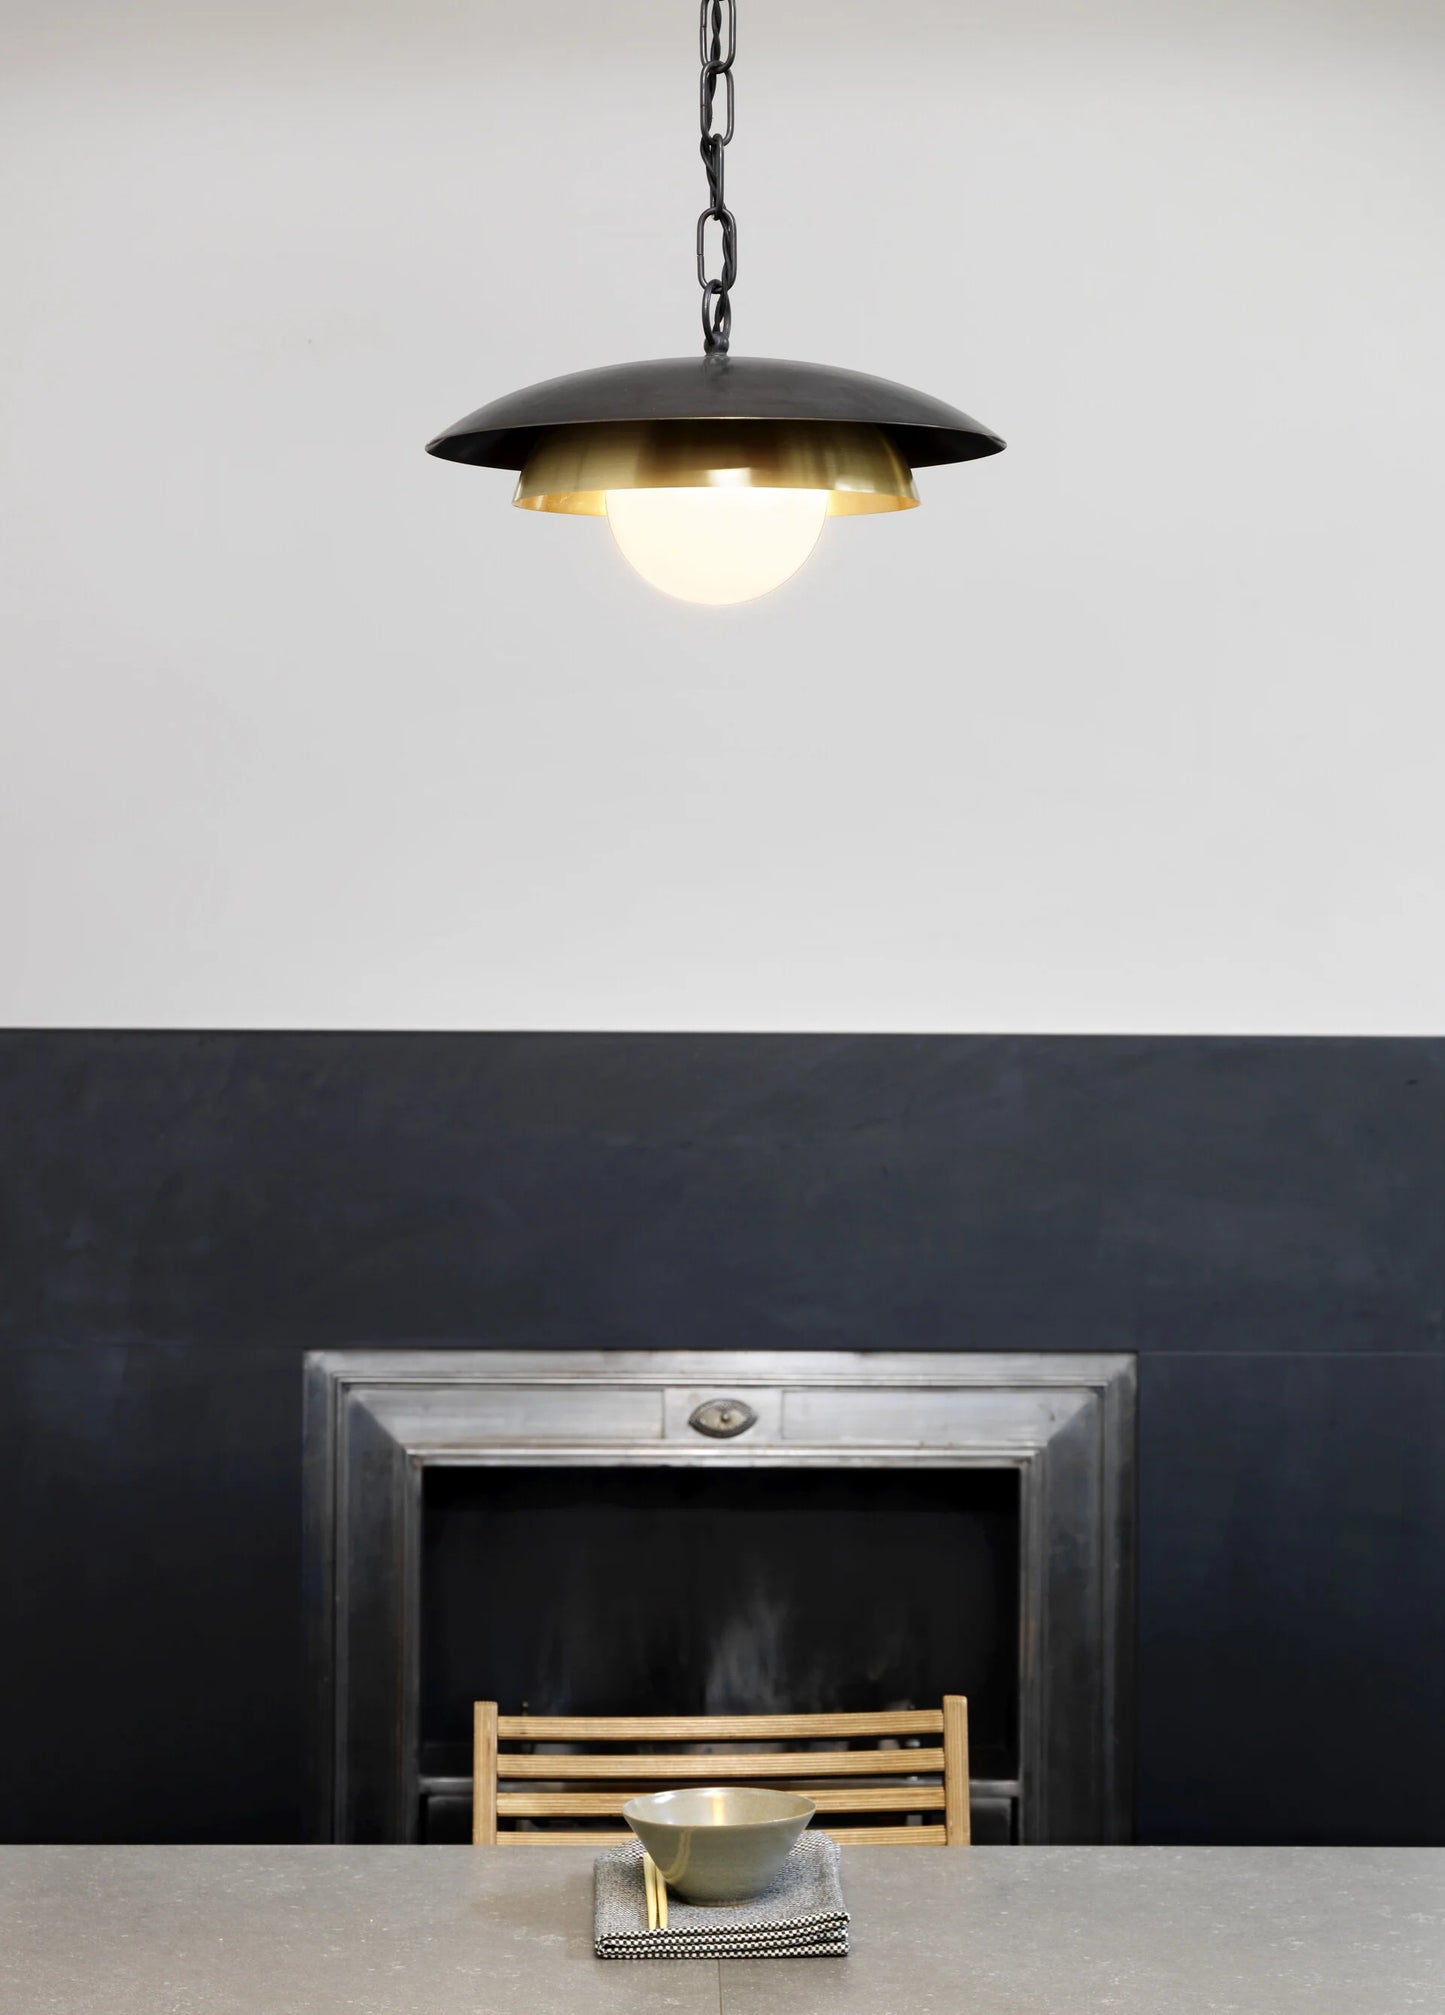 Carapace Chain Pendant by CTO Lighting